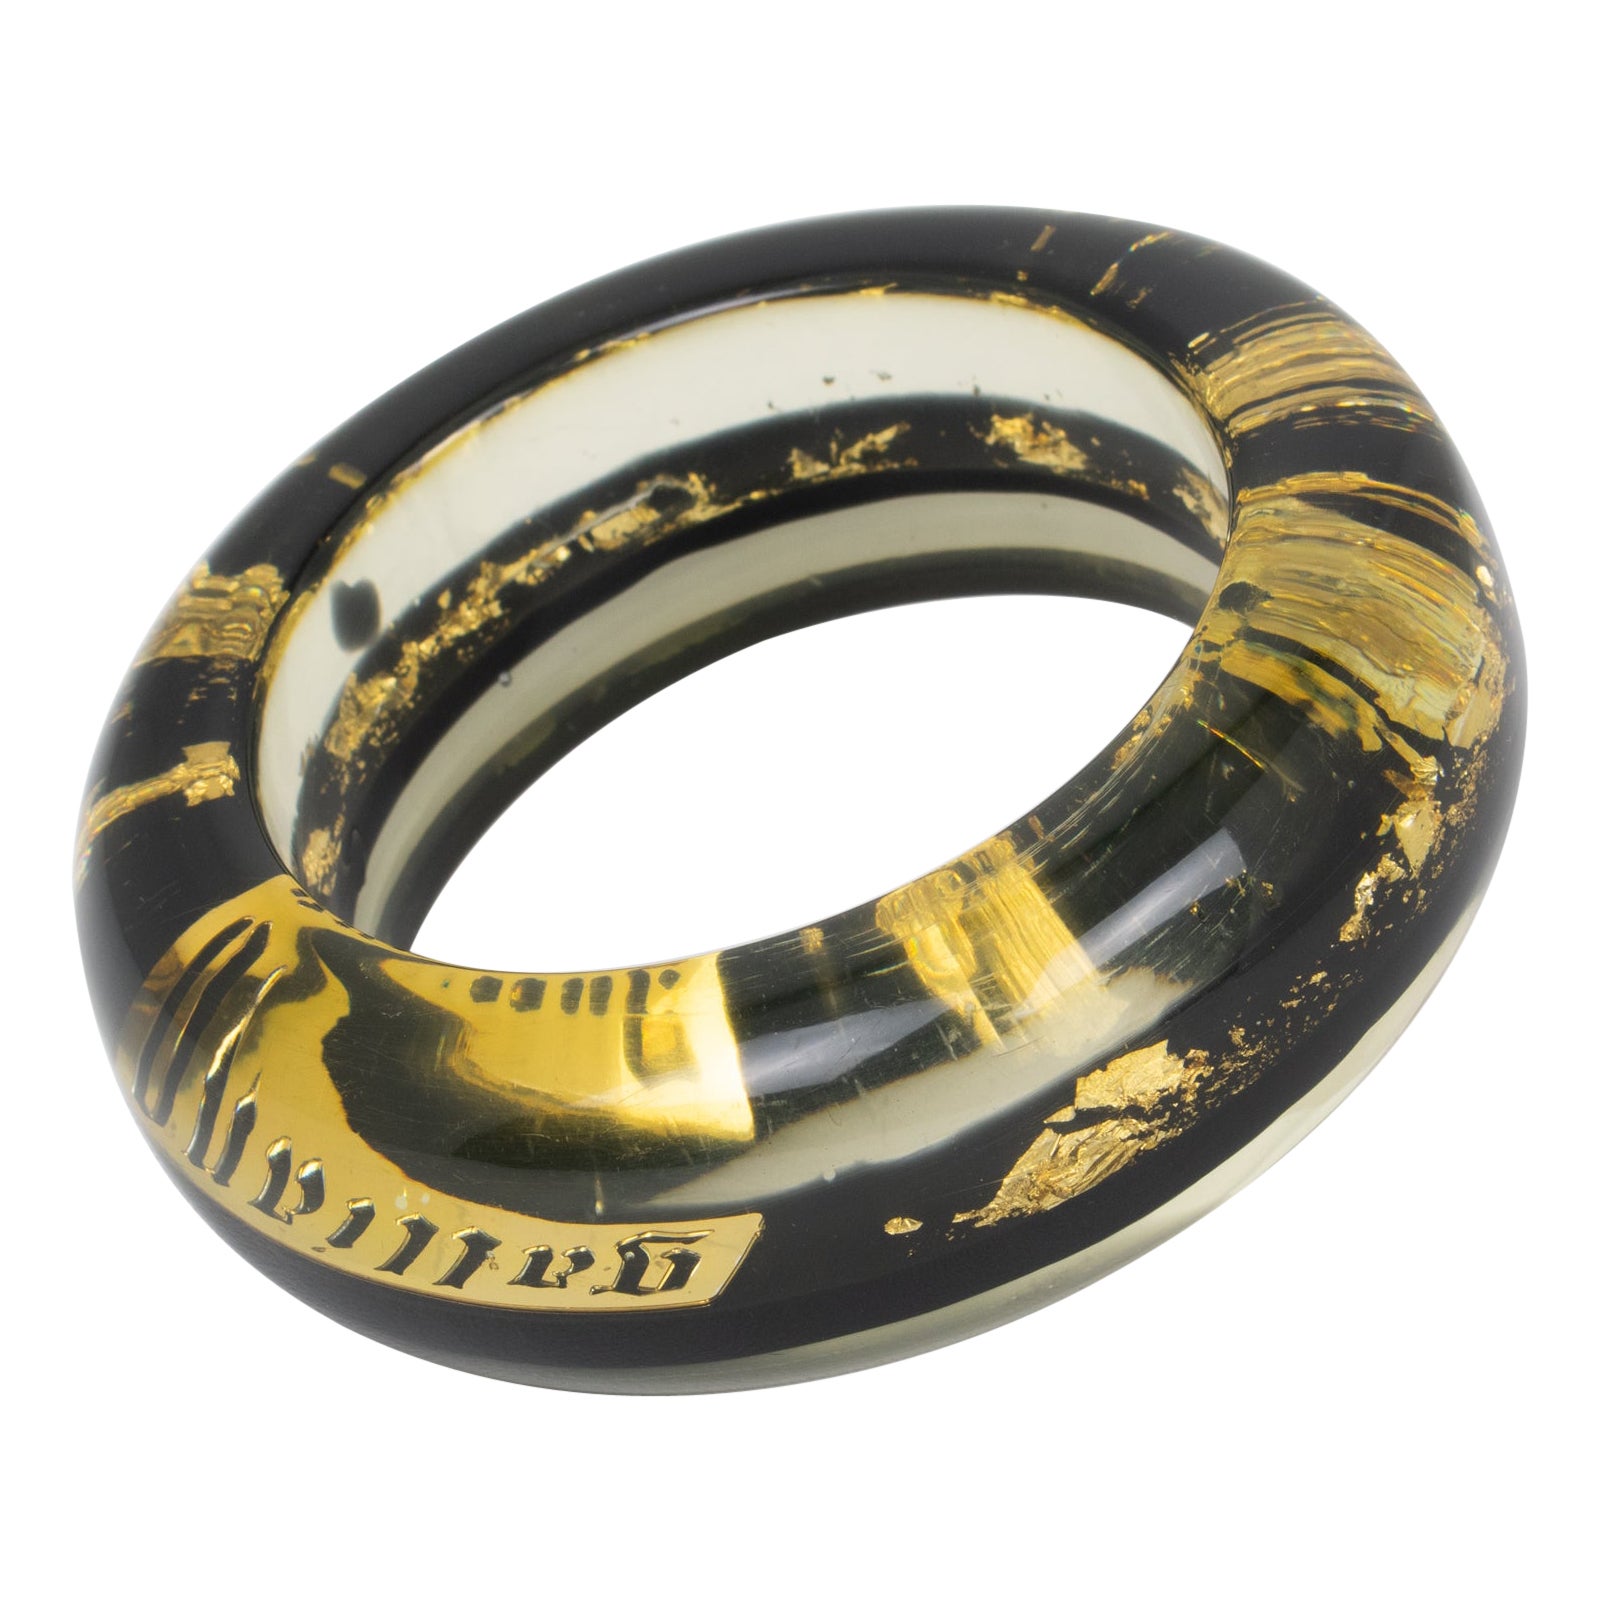 John Galliano Resin Acrylic Bracelet Bangle Gold Flakes Inclusions For Sale